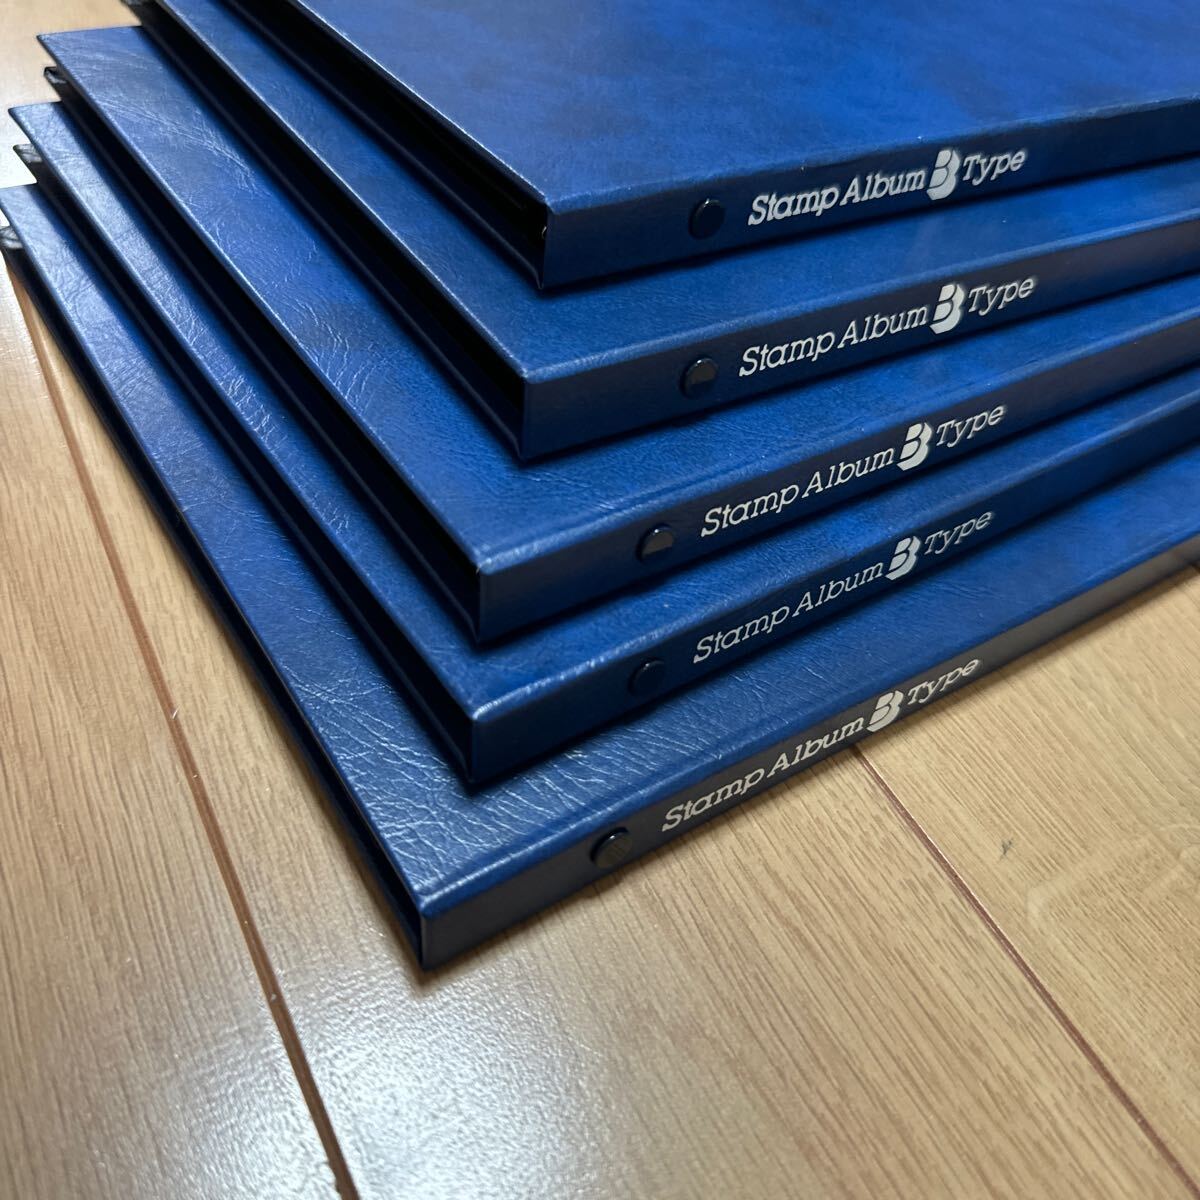  stock book te-ji-SB-30 stamp album 5 pcs. summarize case attaching length some 26.8cm width some 20cm cardboard 8 sheets 16 page 6 step Yupack 60 size 